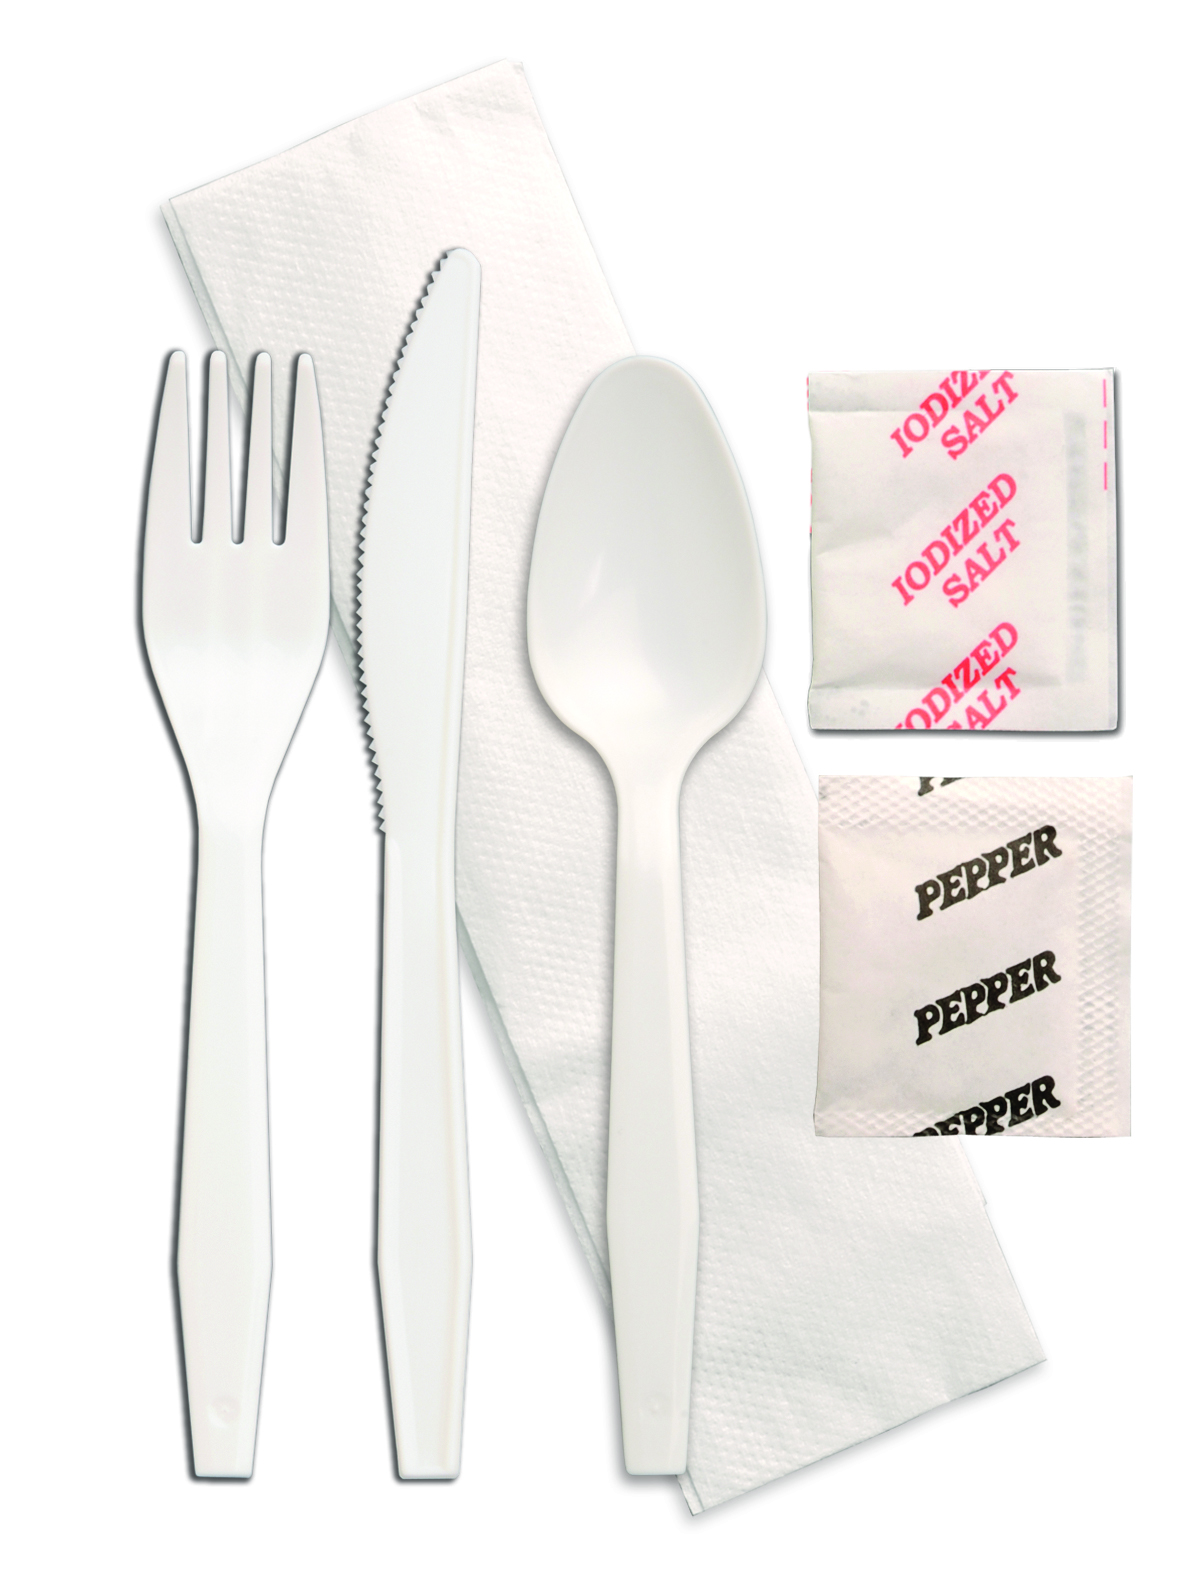 PicturesLogo/CUTLERY PACKETS.jpg